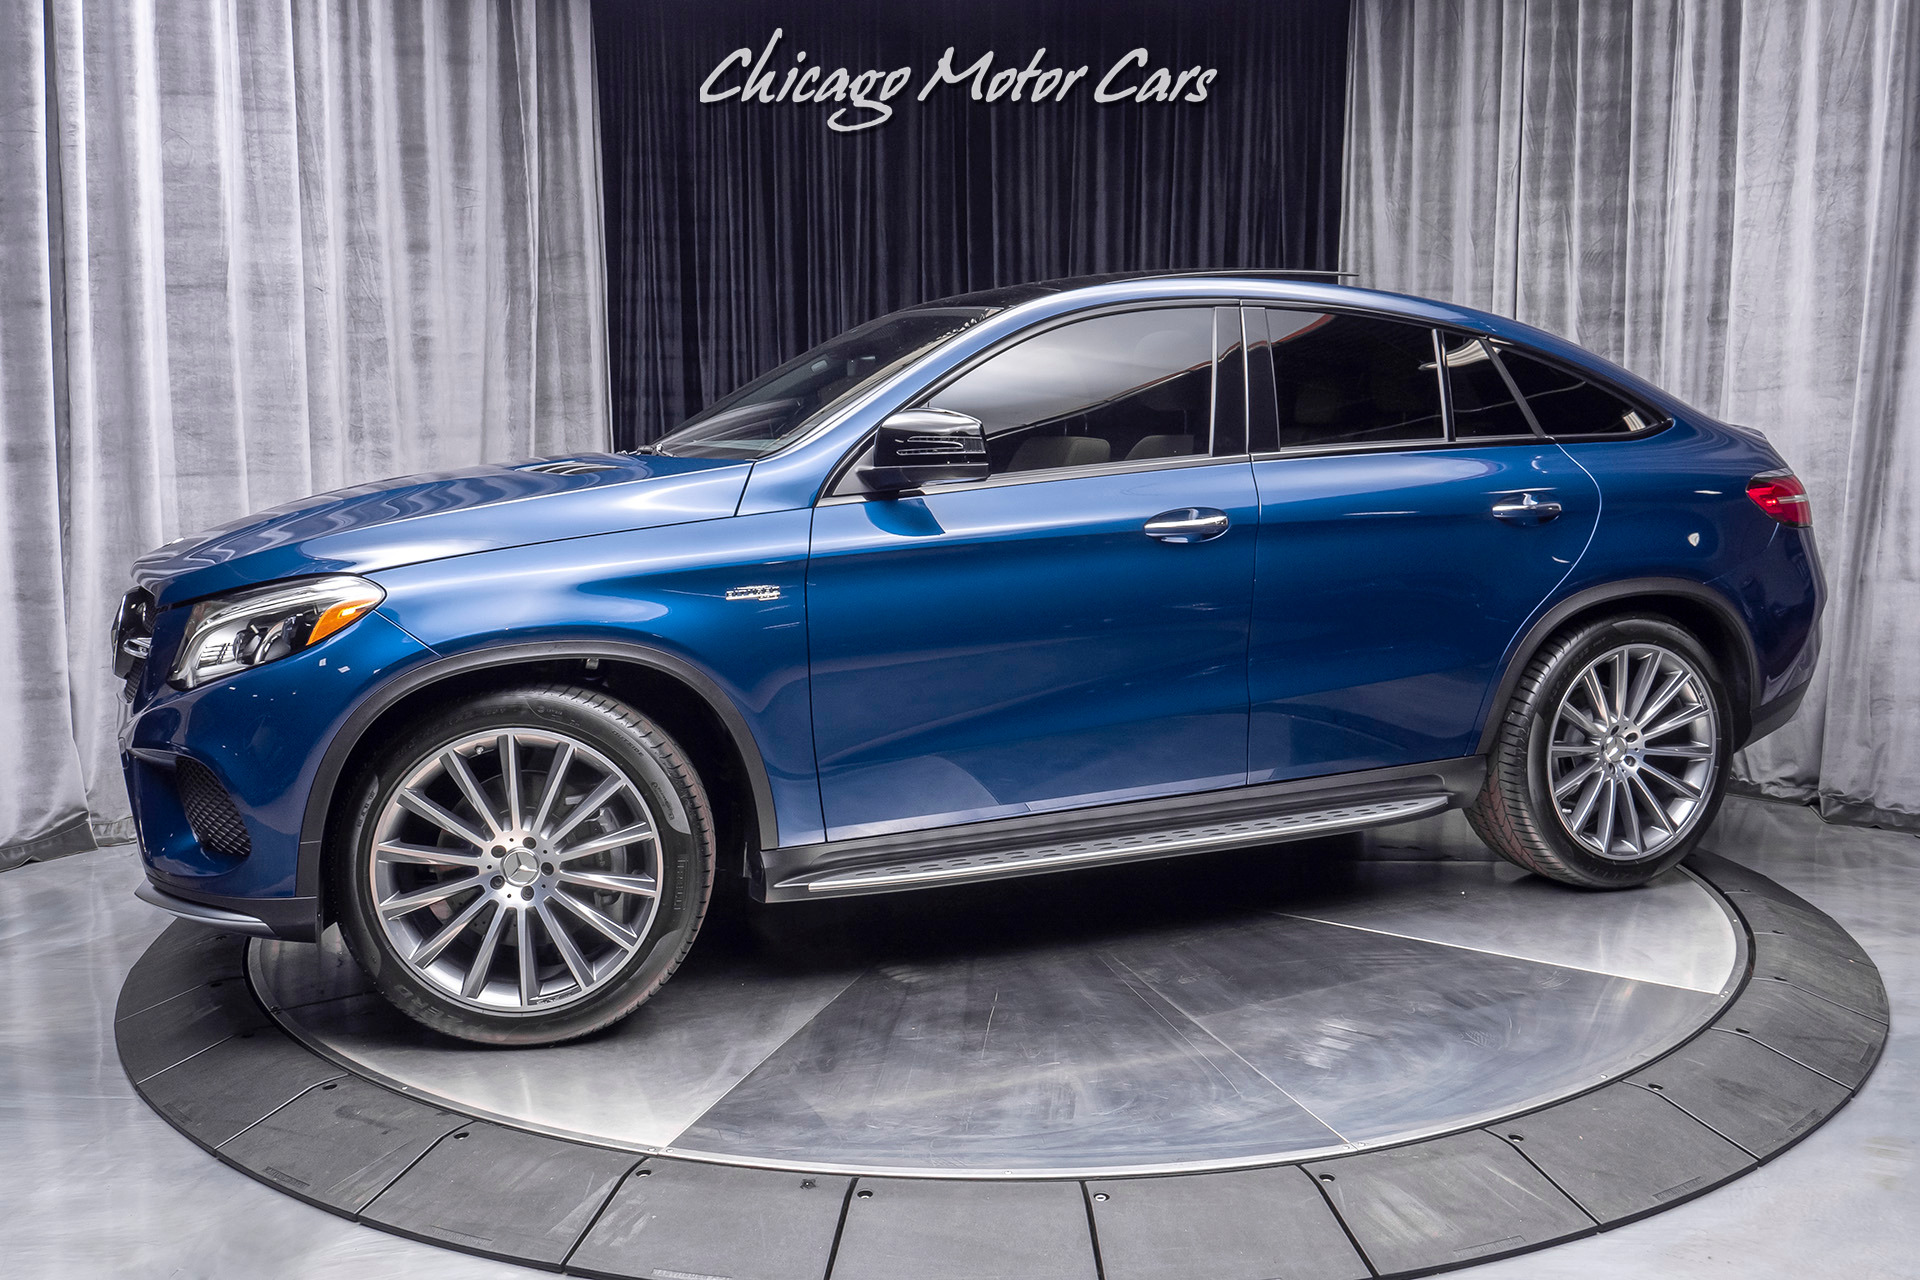 Used 19 Mercedes Benz Gle Amg Gle 43 For Sale Special Pricing Chicago Motor Cars Stock